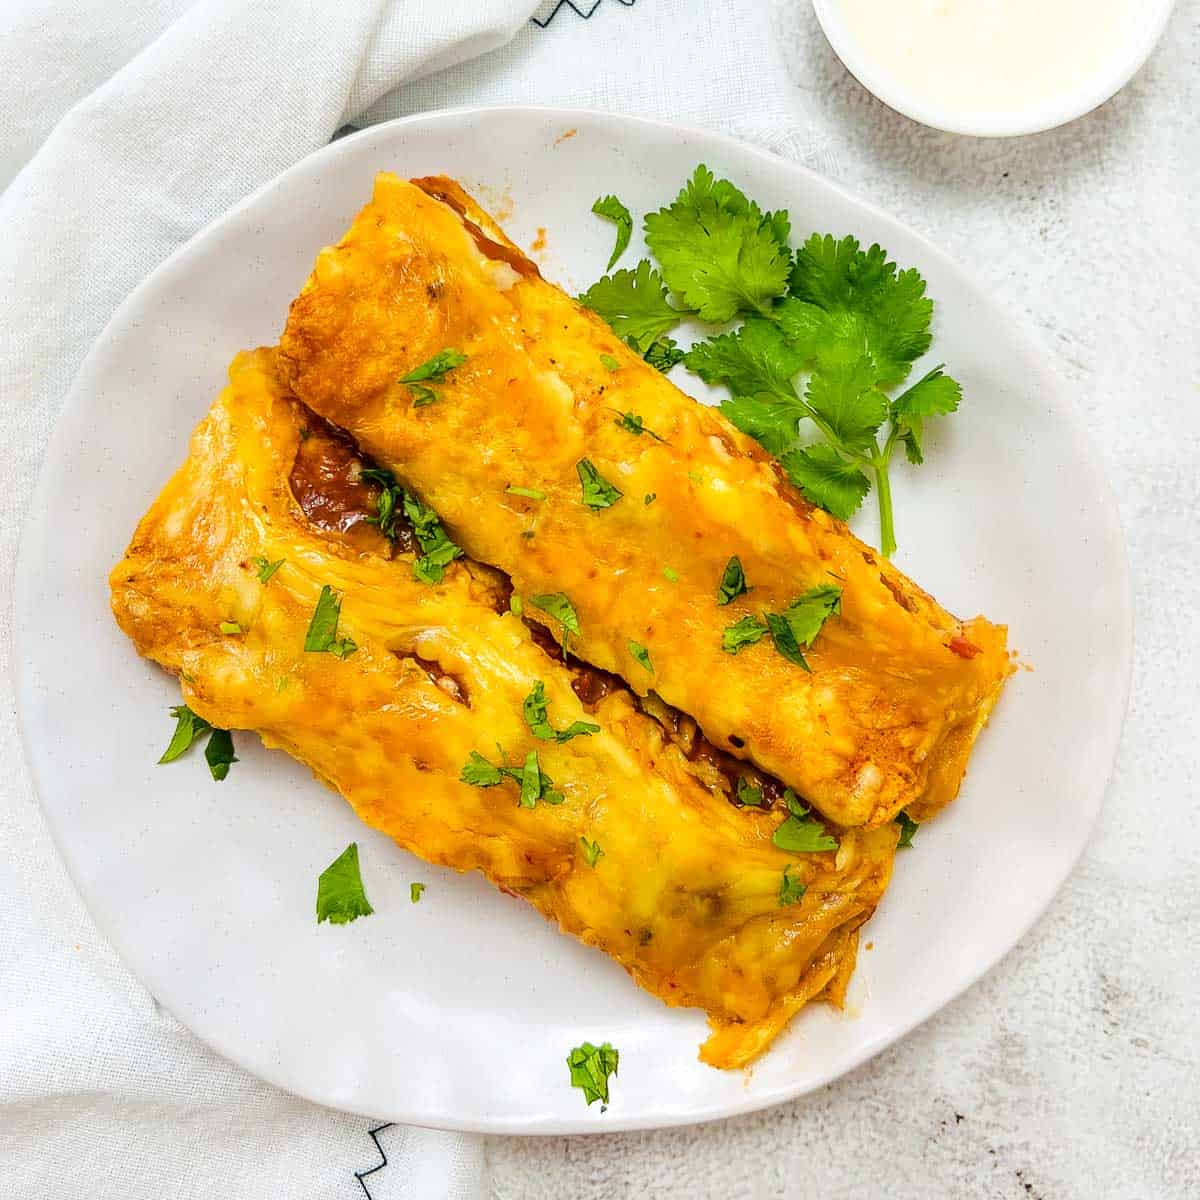 Chicken lentil enchiladas topped with cilantro and served with sour cream.